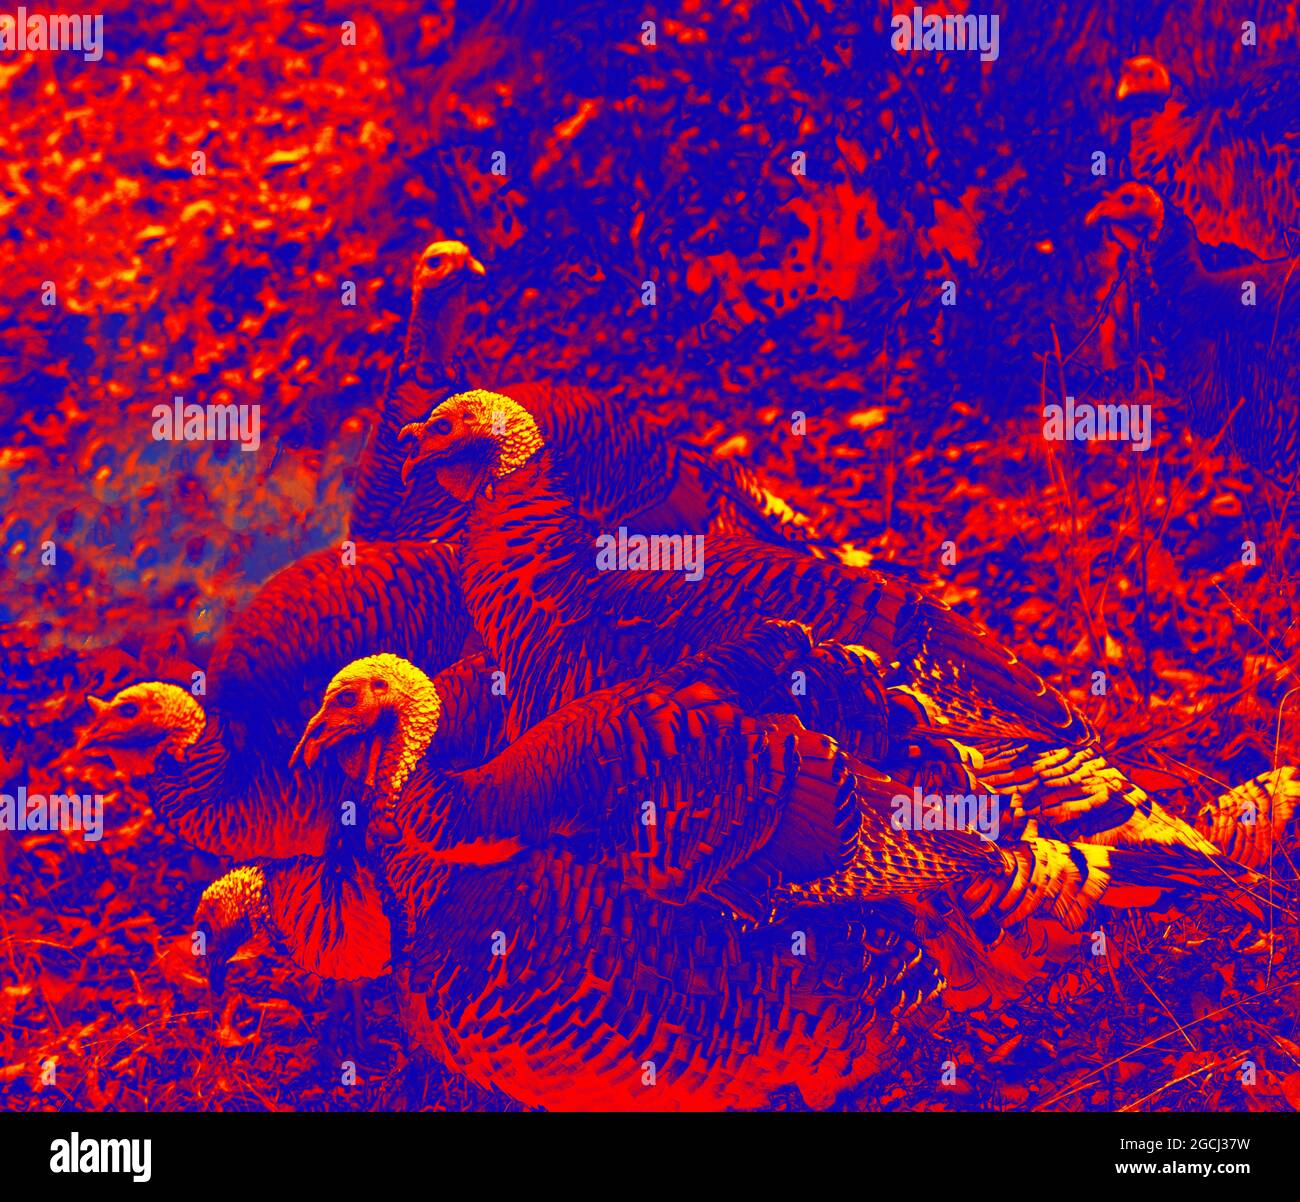 Turkey on poultry yard. Scanning the animal's body temperature with a thermal imager Stock Photo